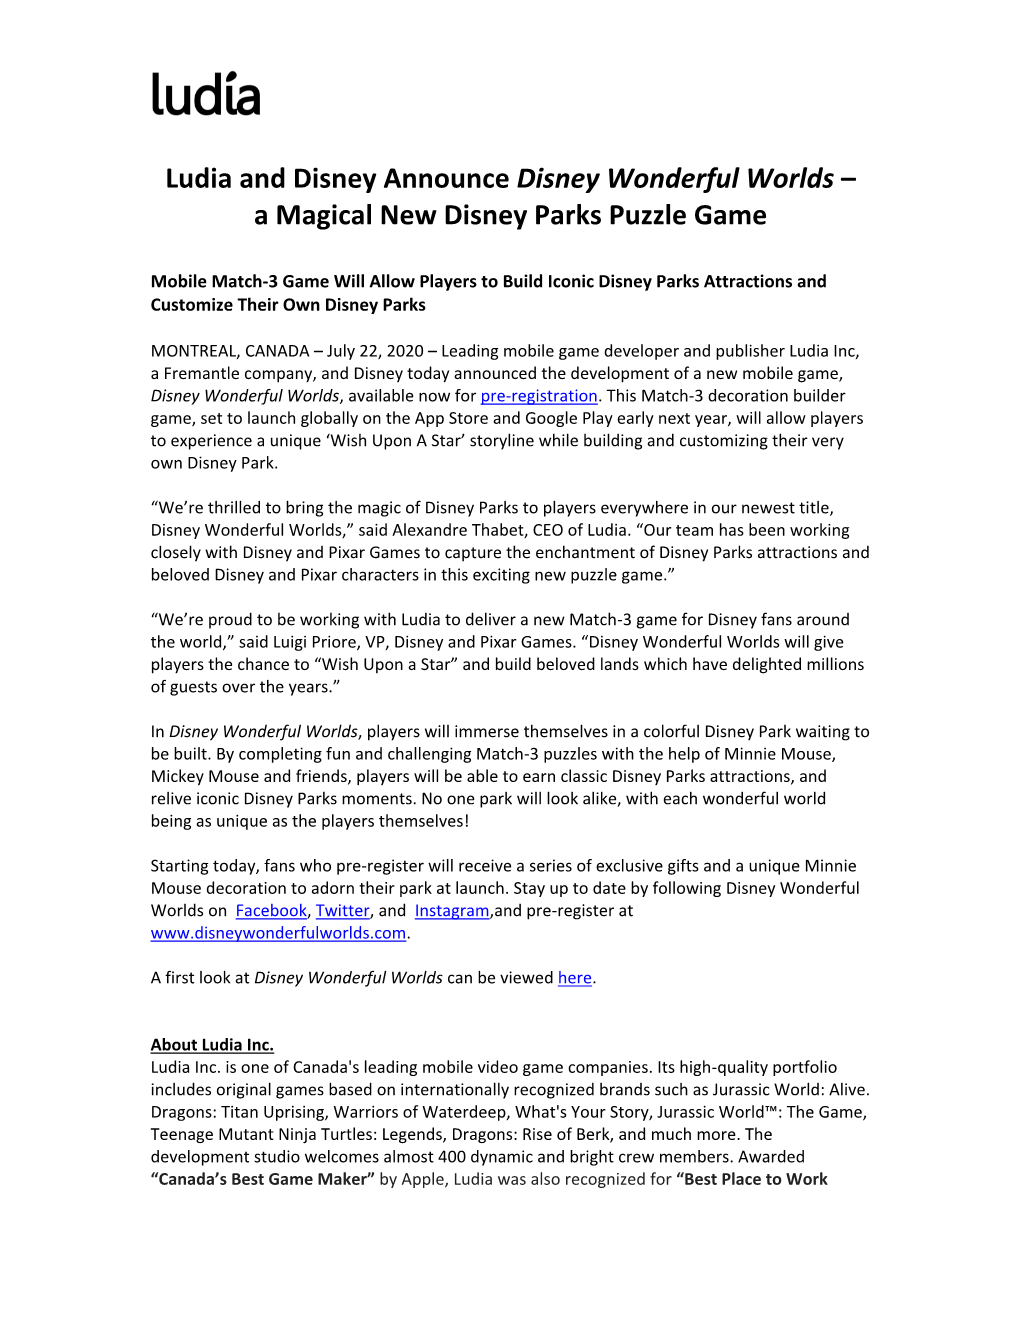 Ludia and Disney Announce Disney Wonderful Worlds – a Magical New Disney Parks Puzzle Game